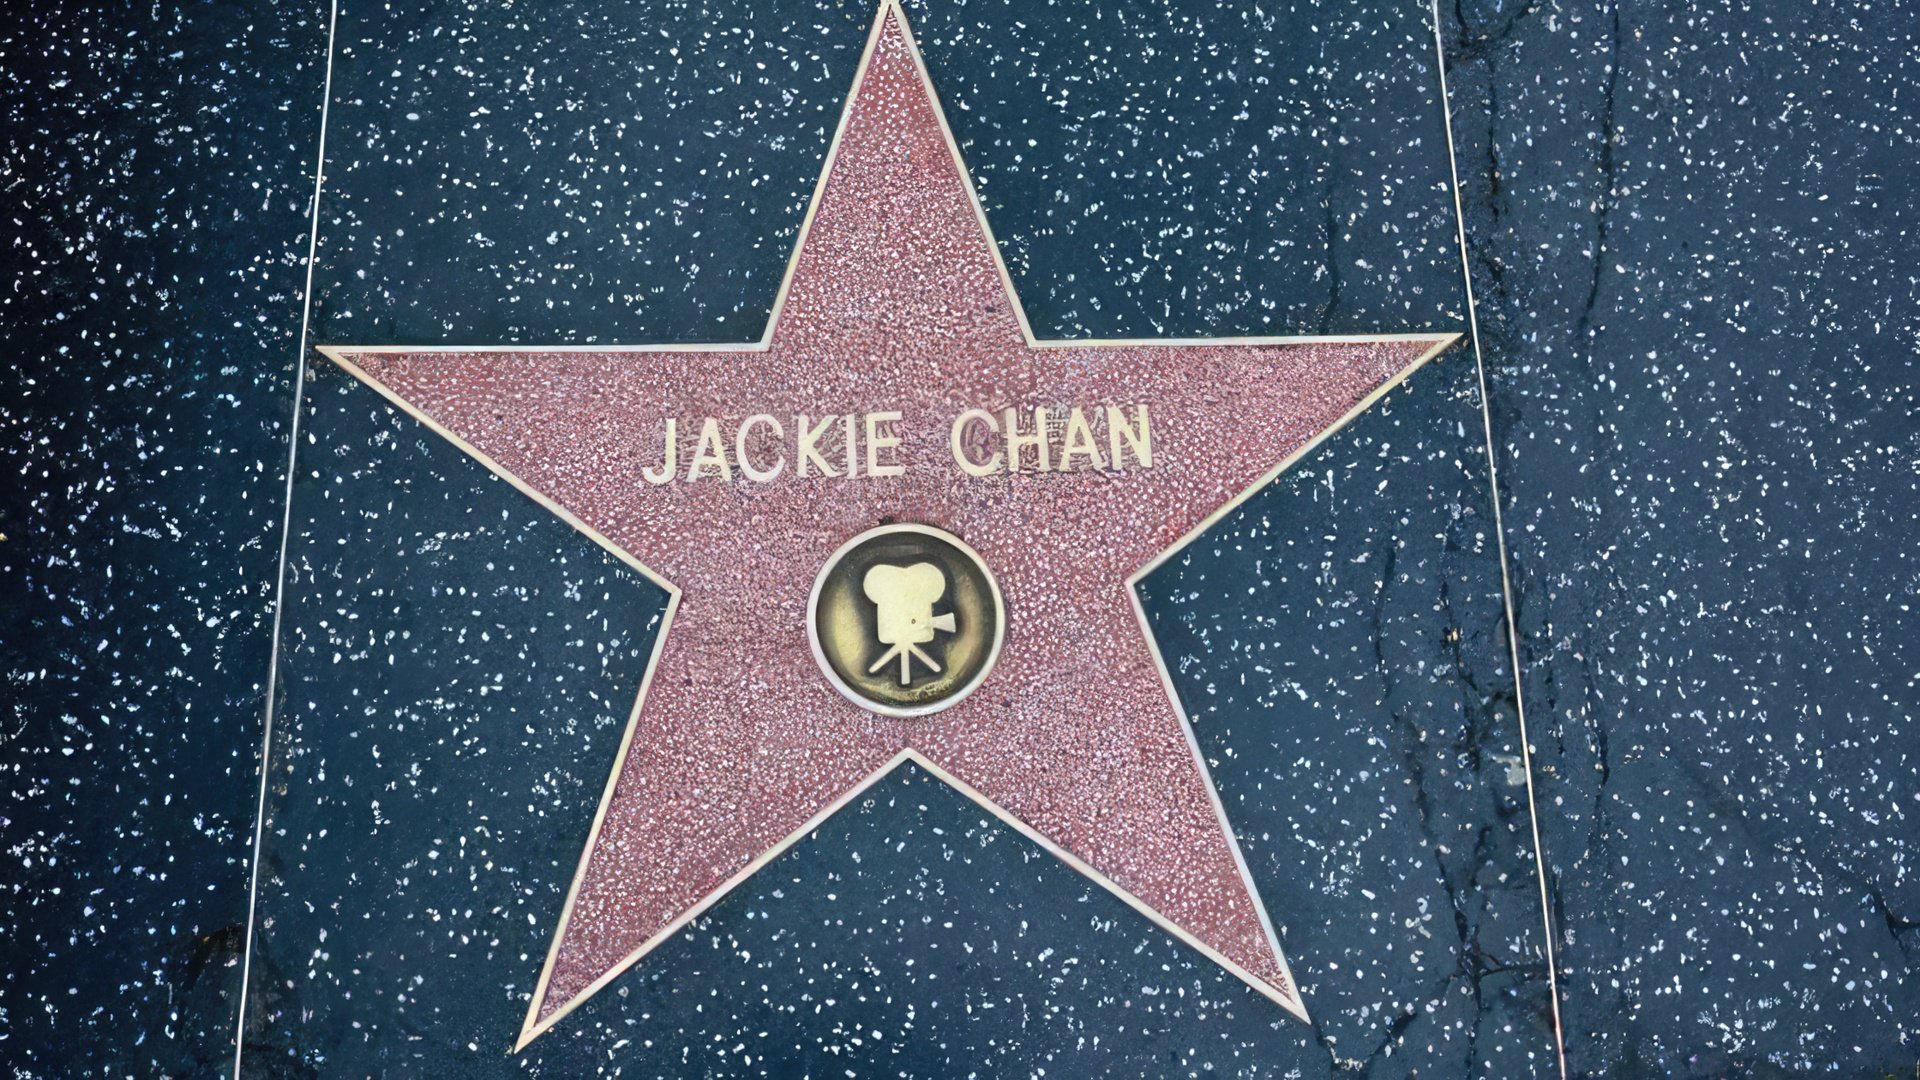 Jackie Chan’s star in the Hollywood Walk of Fame